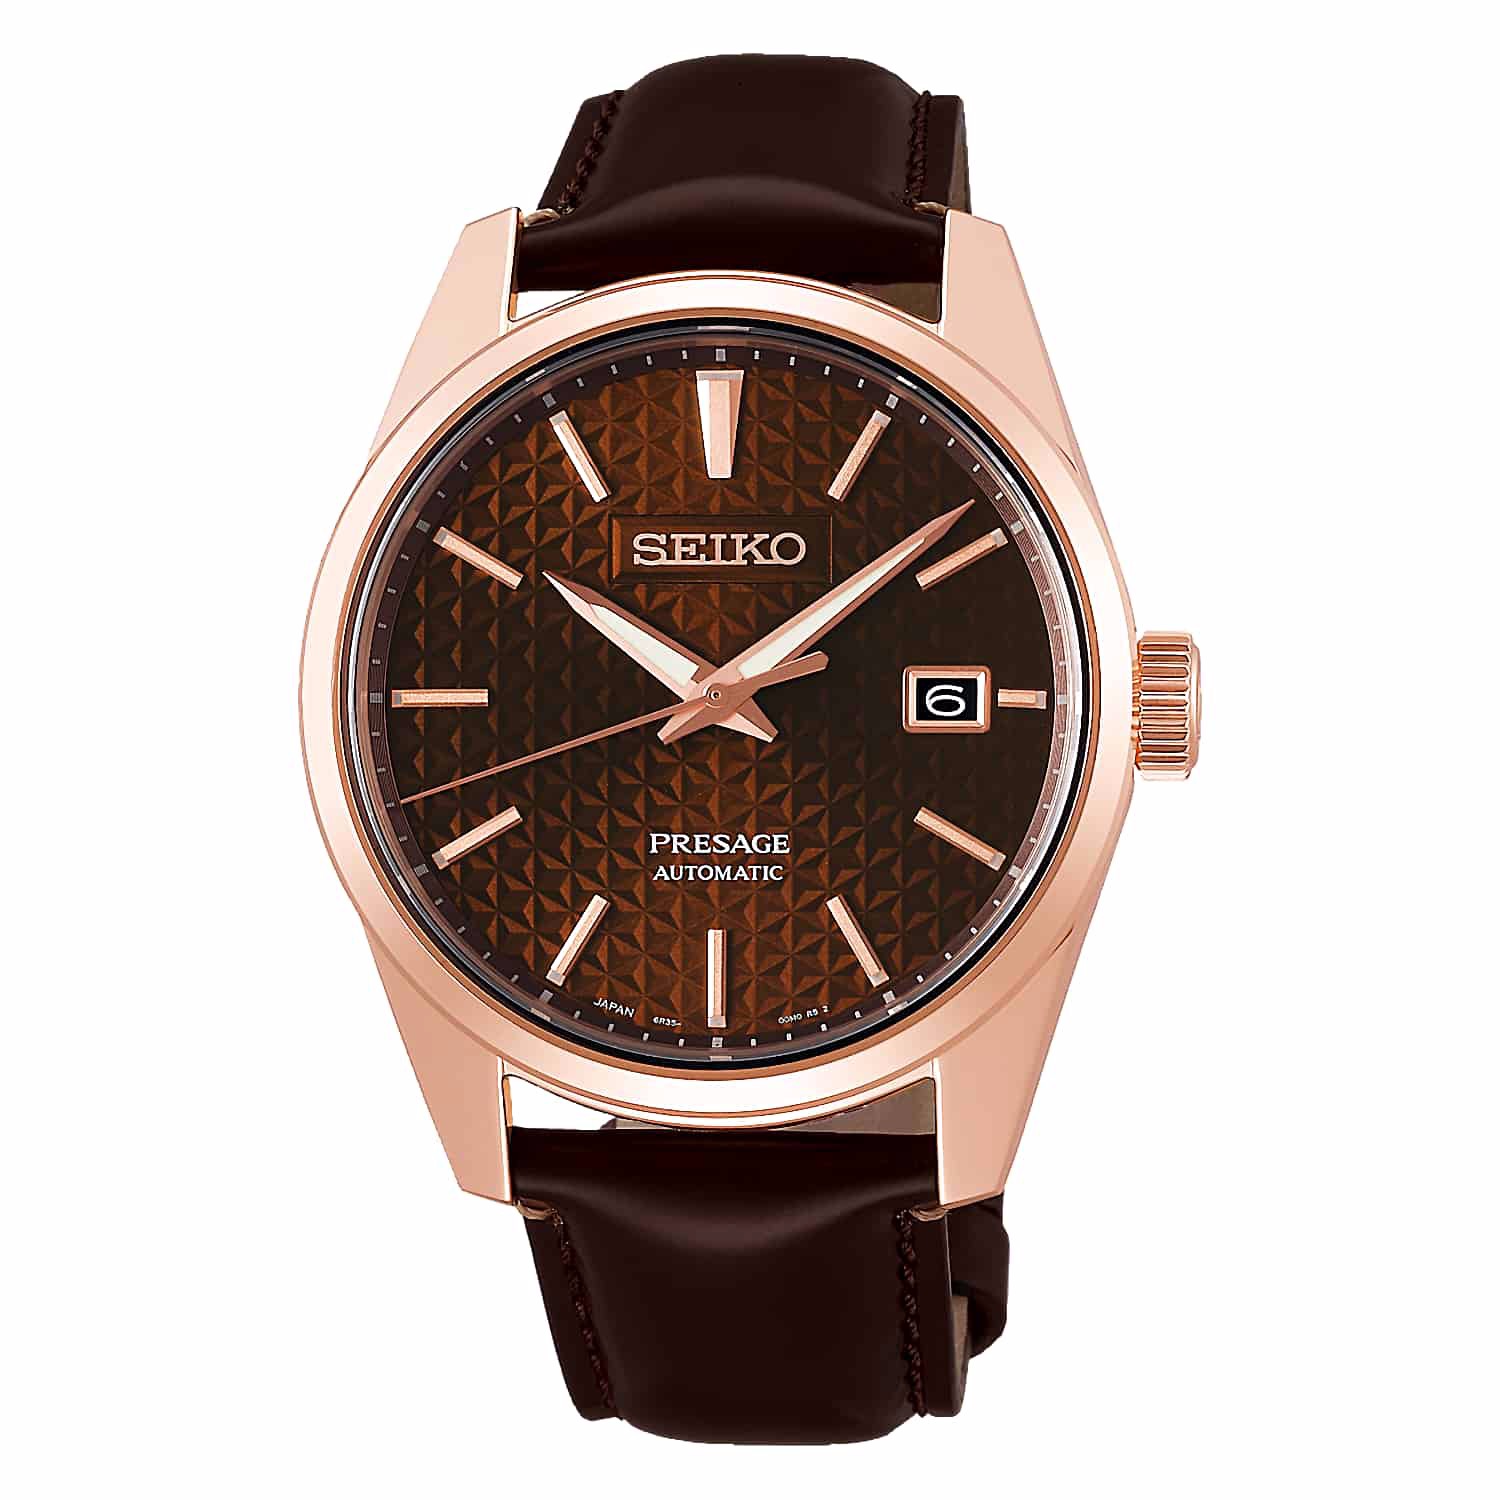 SPB170J1 SEIKO Presage Sharp Edged Series Watch. Since time immemorial, a central aspect of the Japanese sense of beauty has been simplicity.  To create objects or images of refinement and grace with few elements and no extraneous decoration has long been